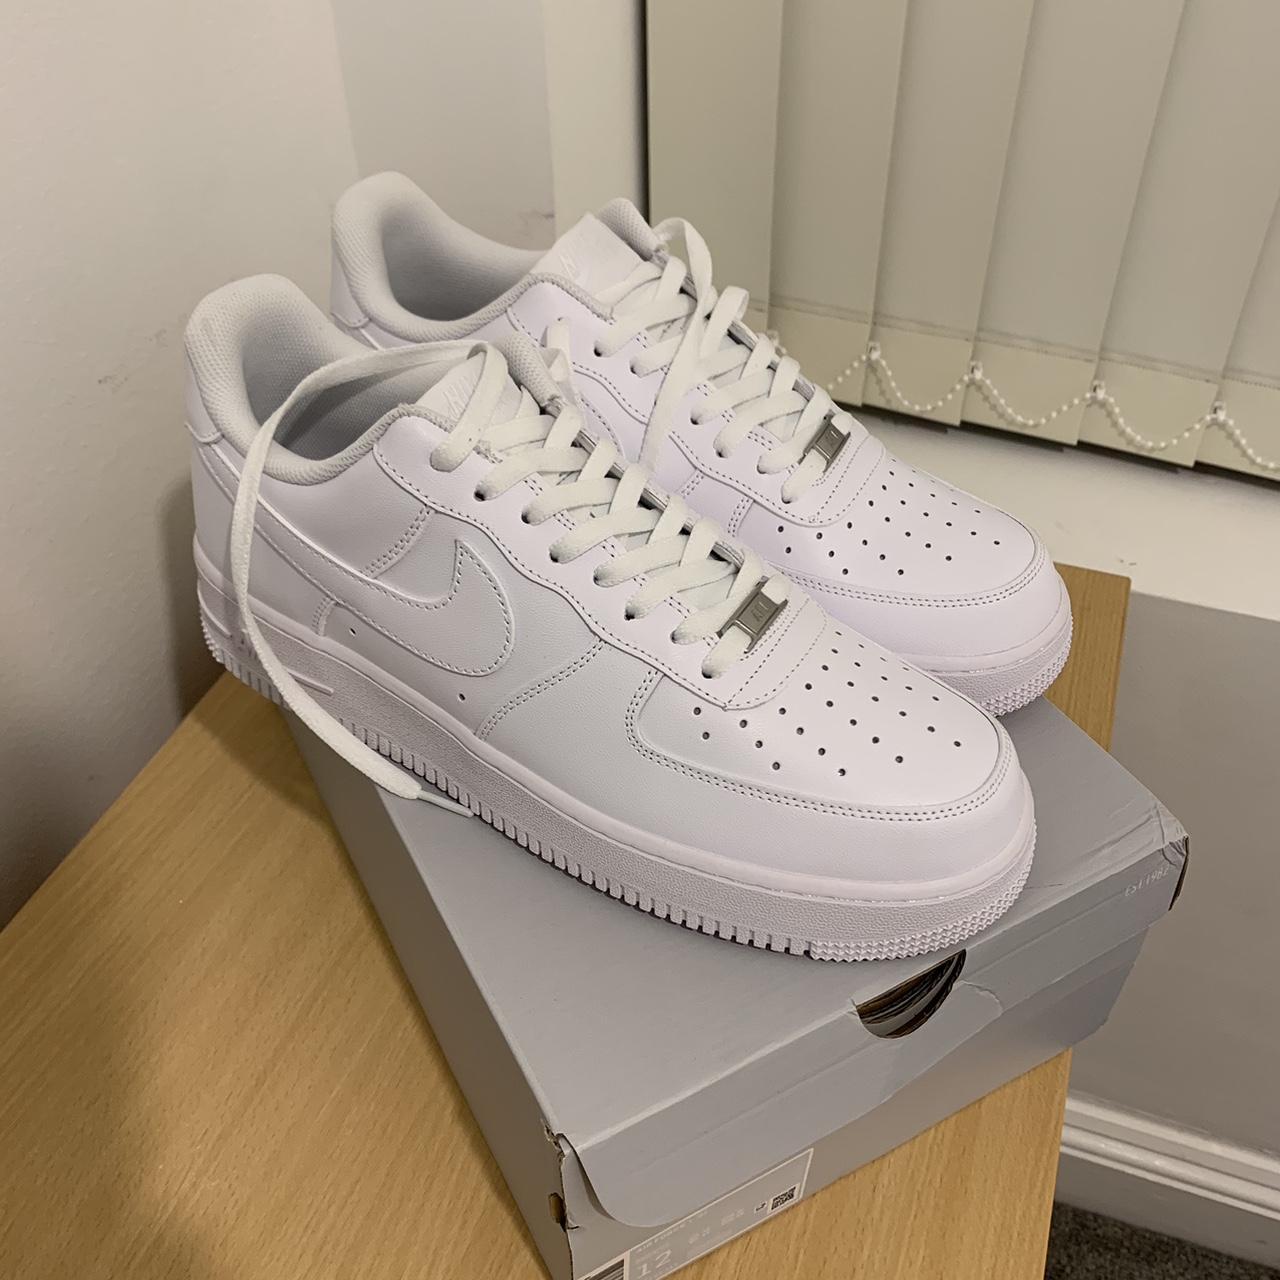 NIKE AIR FORCE 1 ‘07 SIZE 11 Got these for my... - Depop